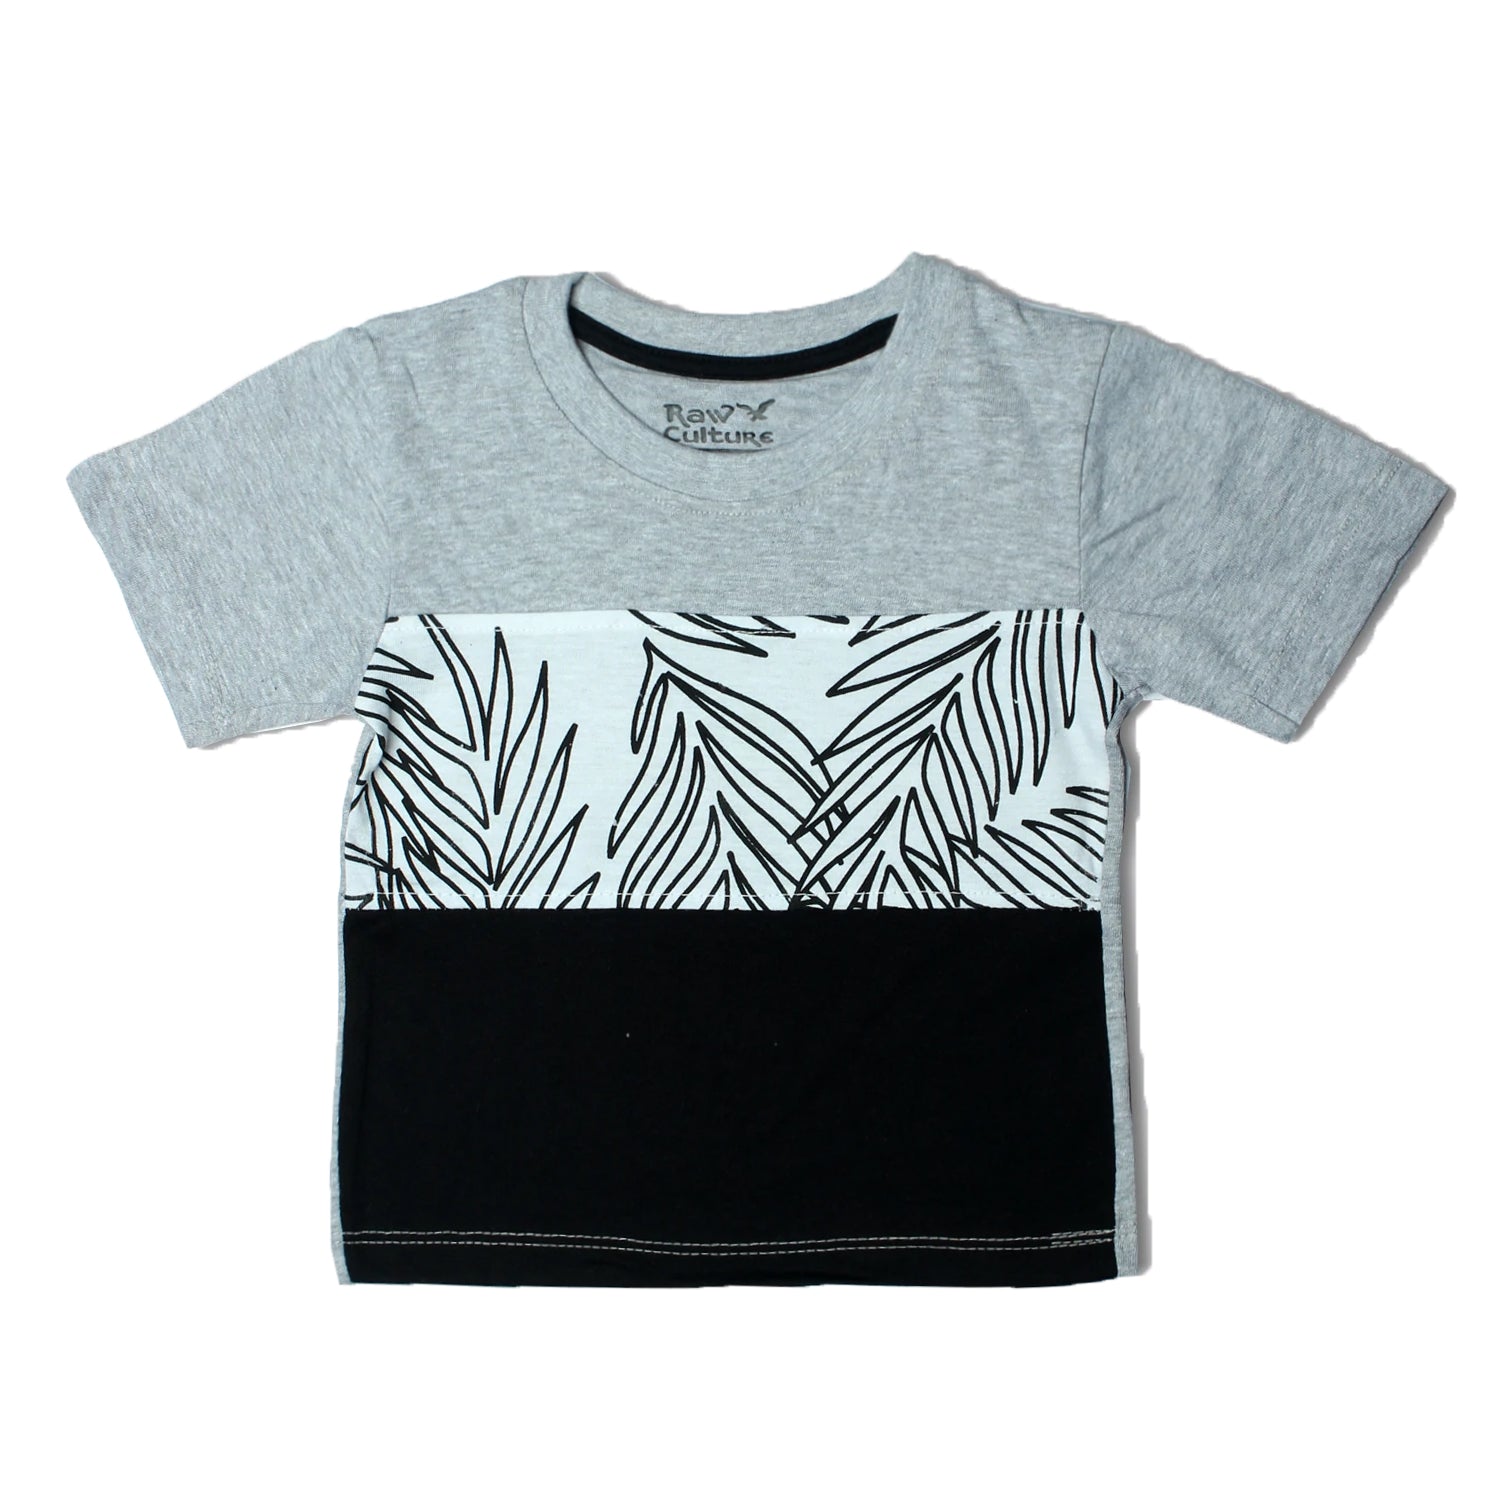 BLACK GREY WHITE WITH LEAF PRINTED HALF SLEEVES T-SHIRT - Expo City